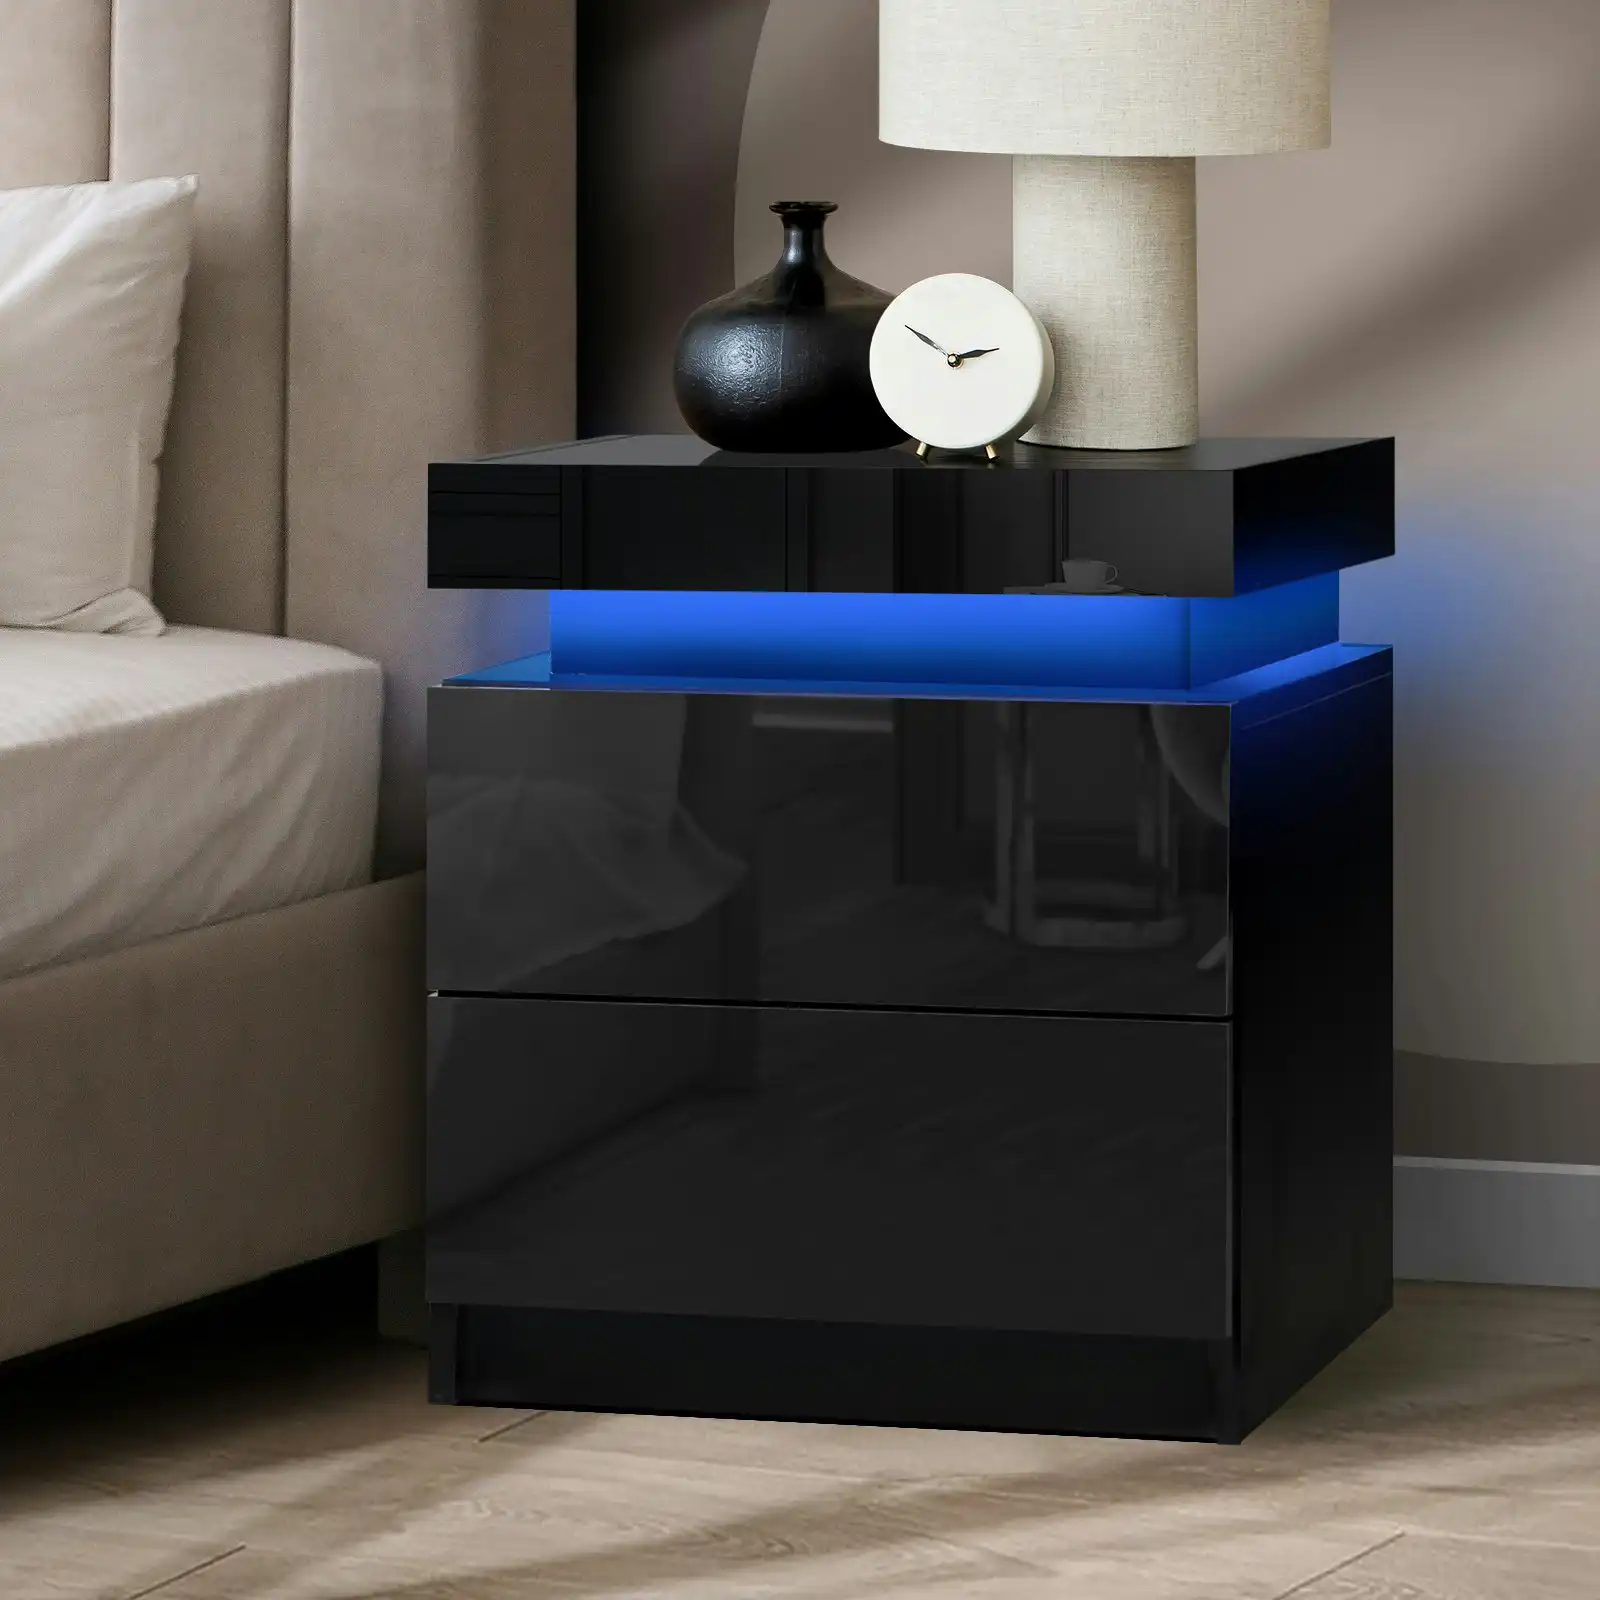 Oikiture Bedside Table RGB LED Nightstand Cabinet 2 Drawers Side Table Furniture Black